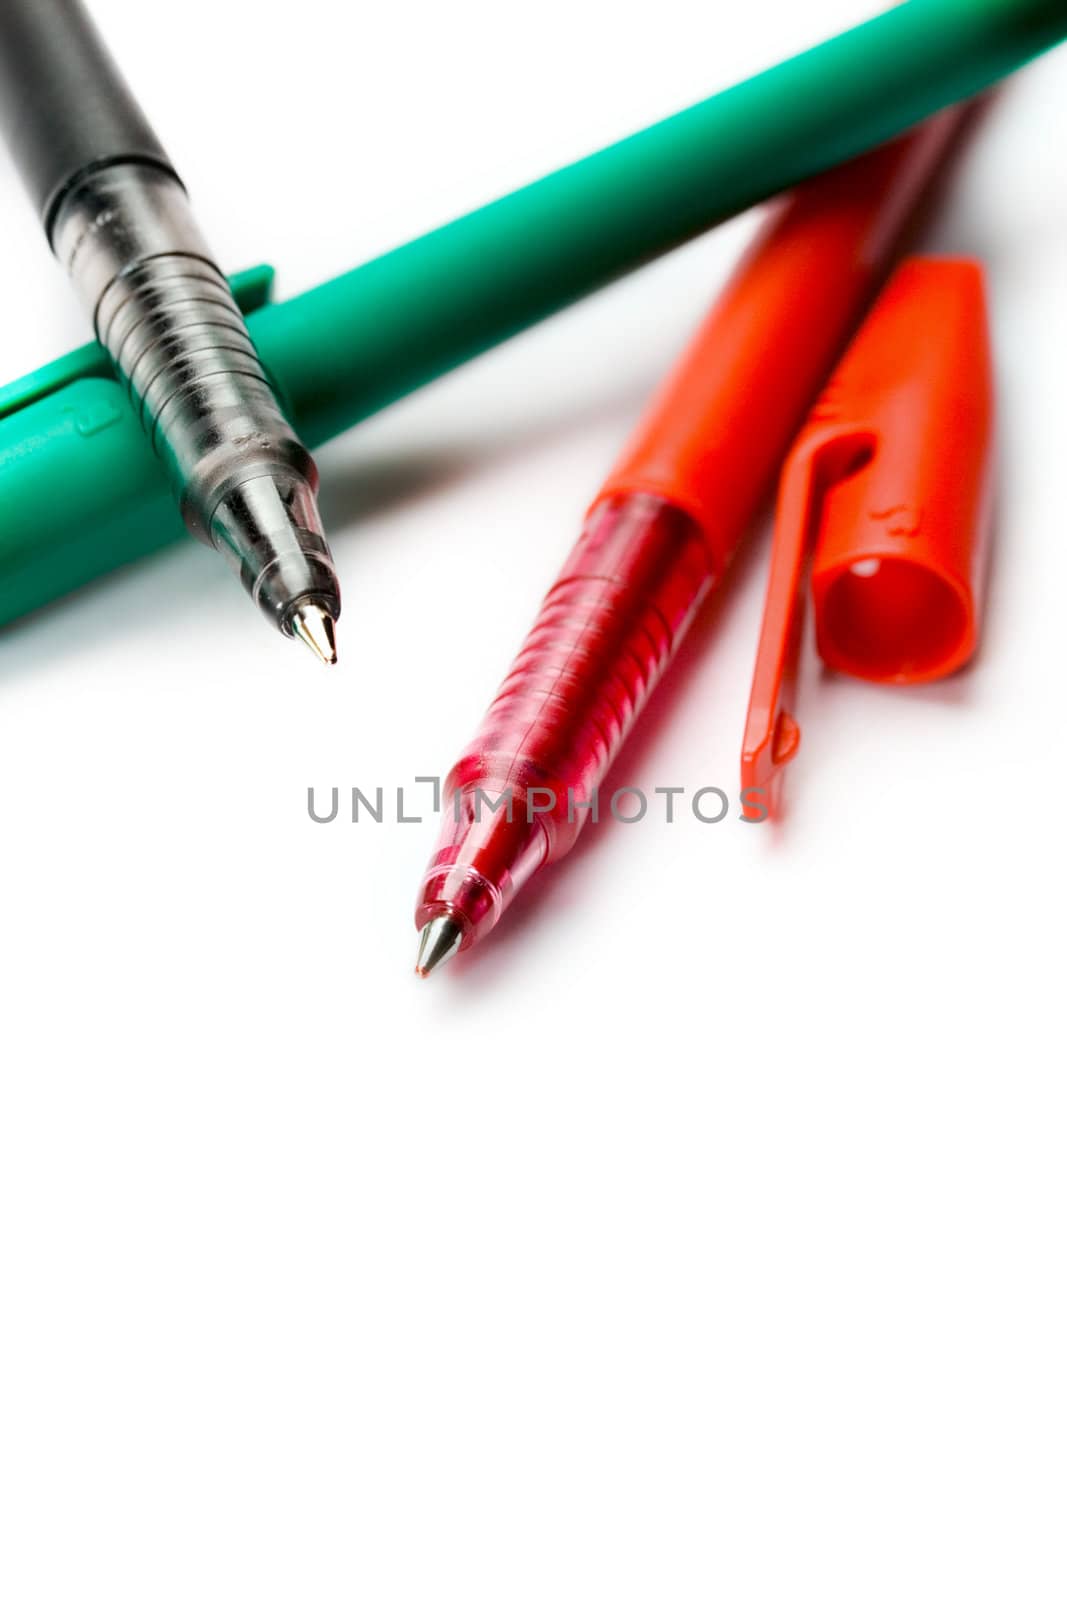 Pens isolated on white